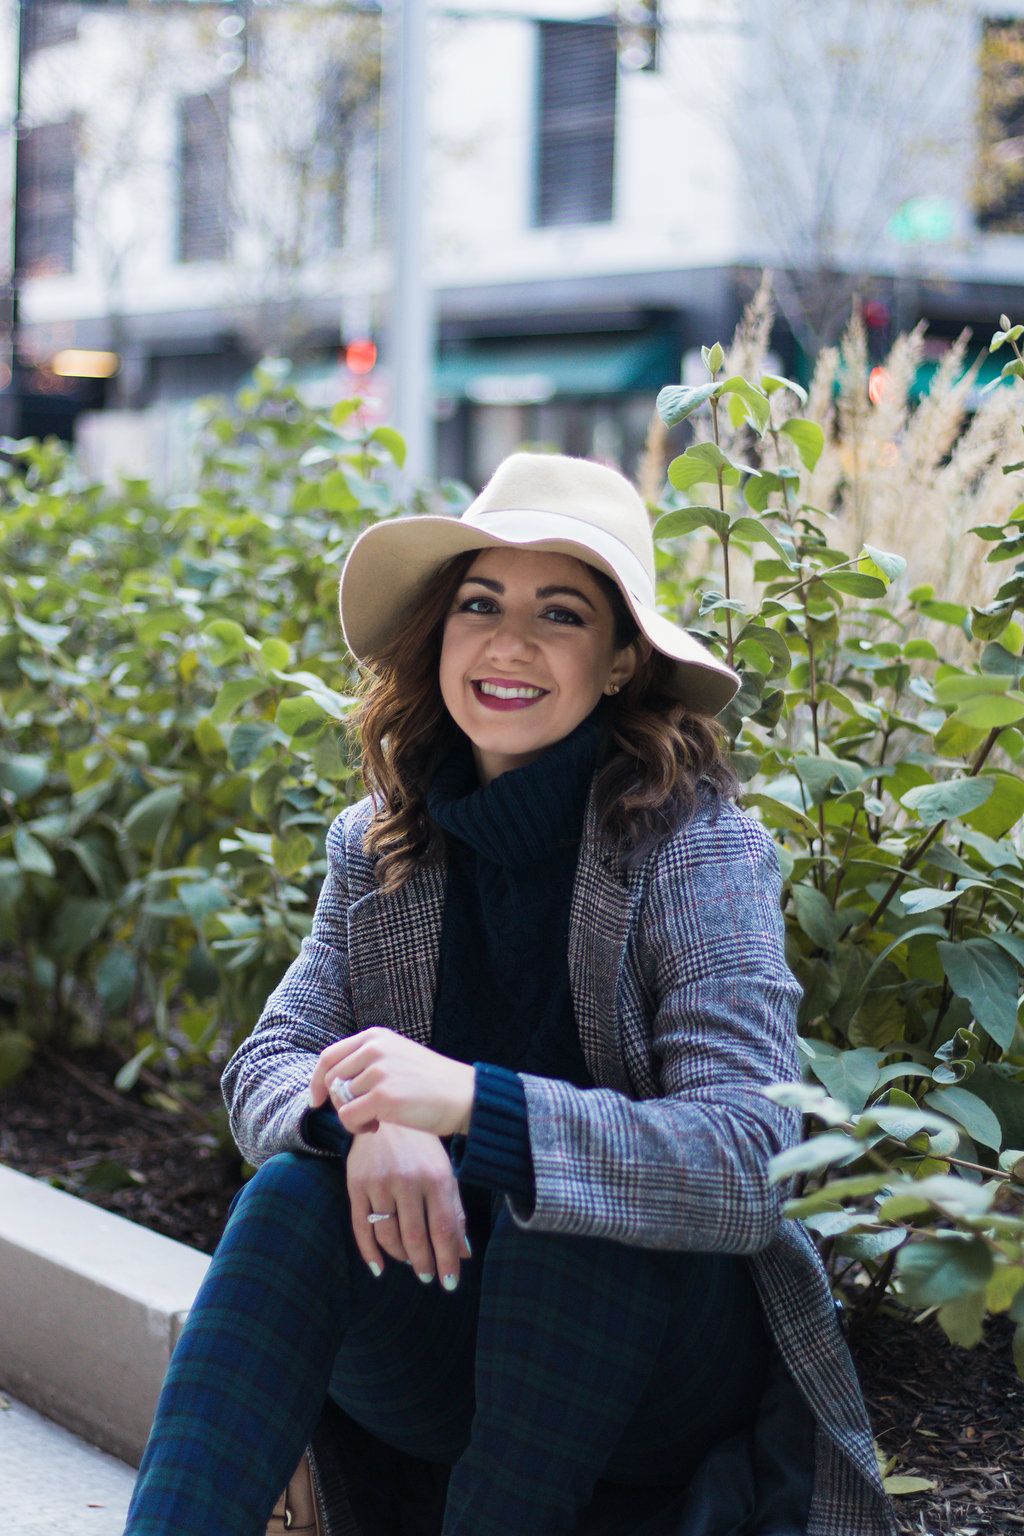 Lifestyle blogger Roxanne of Glass of Glam wearing plaid pants, a plaid coat, felt fedora, white booties, and a cable knit sweater